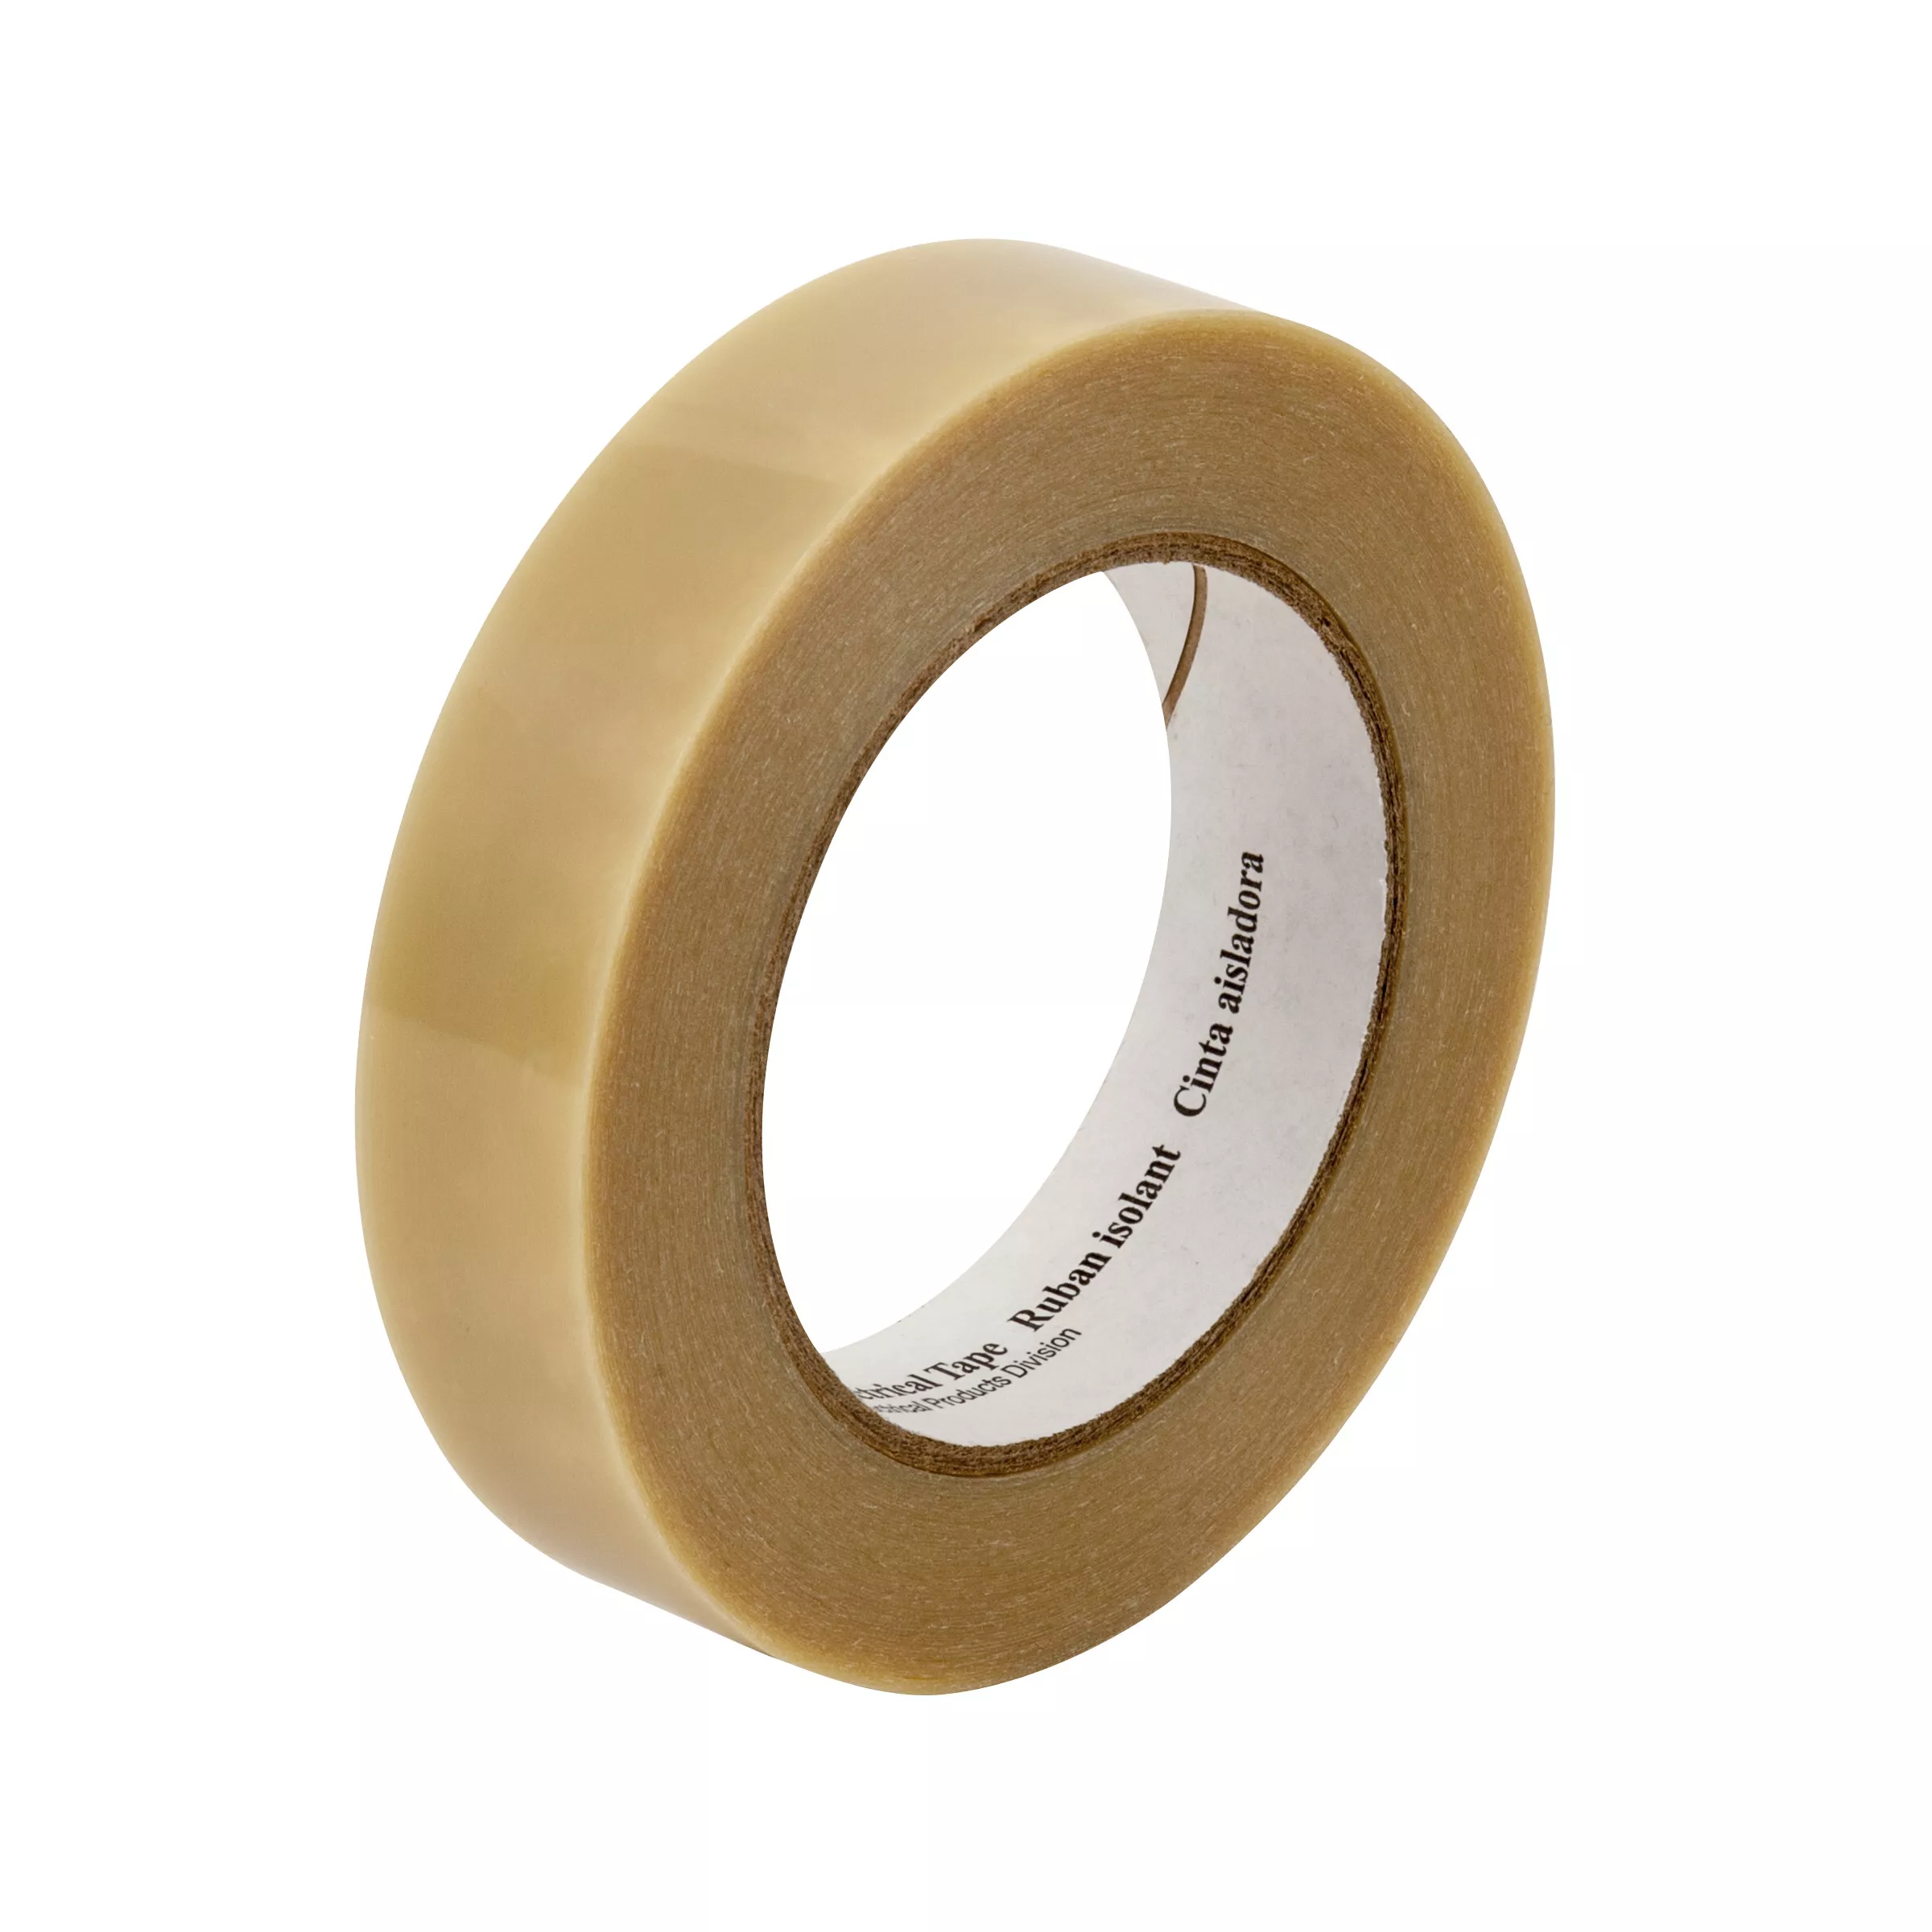 SKU 7010045345 | 3M™ Polyester Film Electrical Tape 58